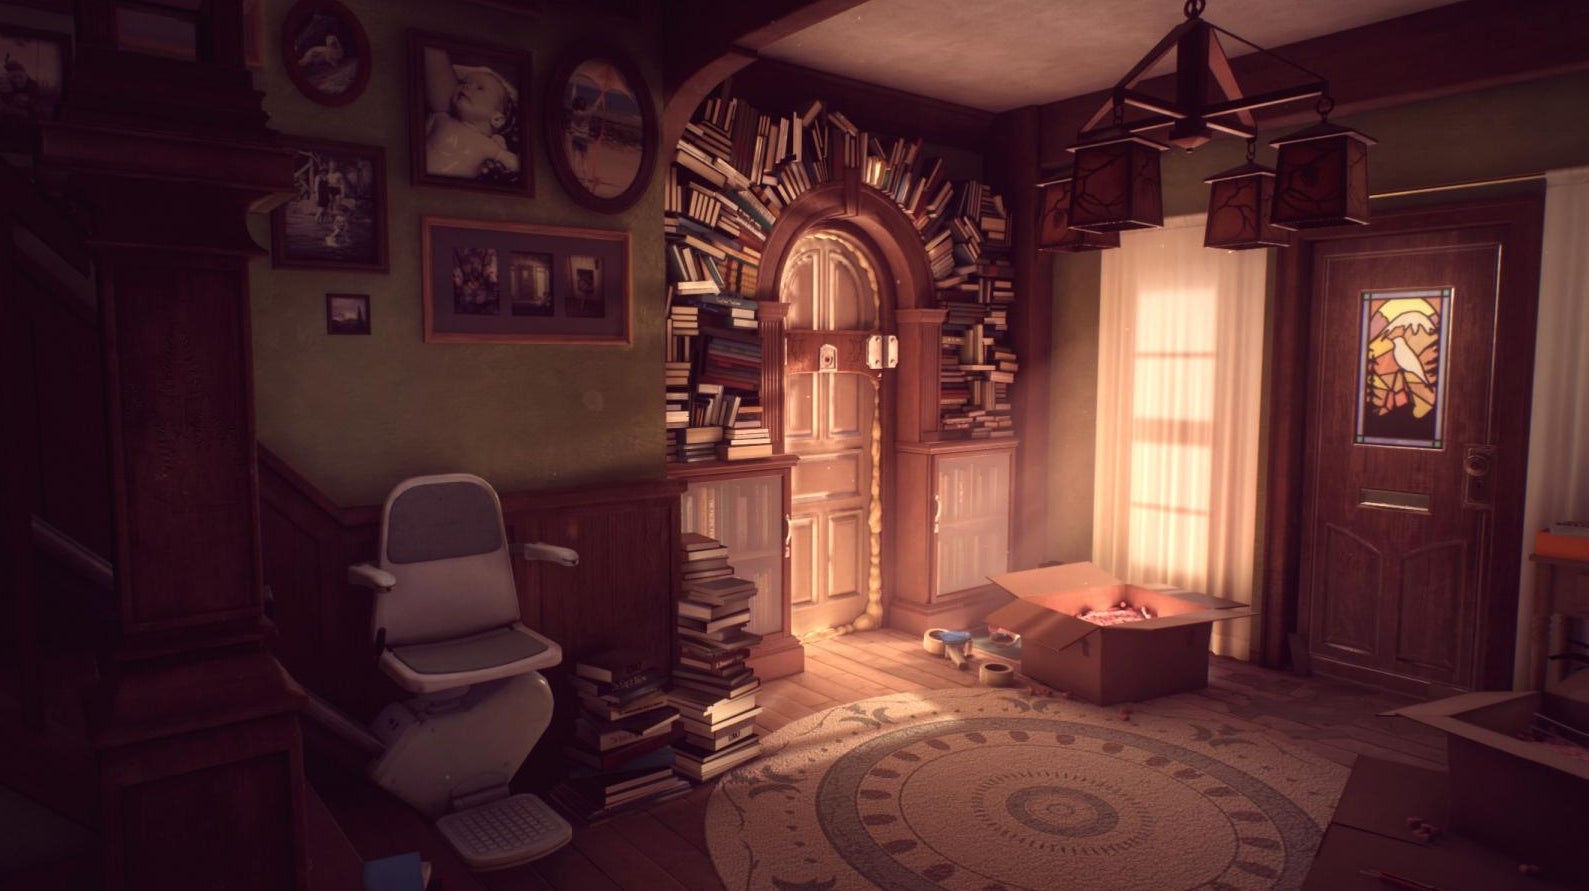 Image for Edith Finch and finding meaning in materialism